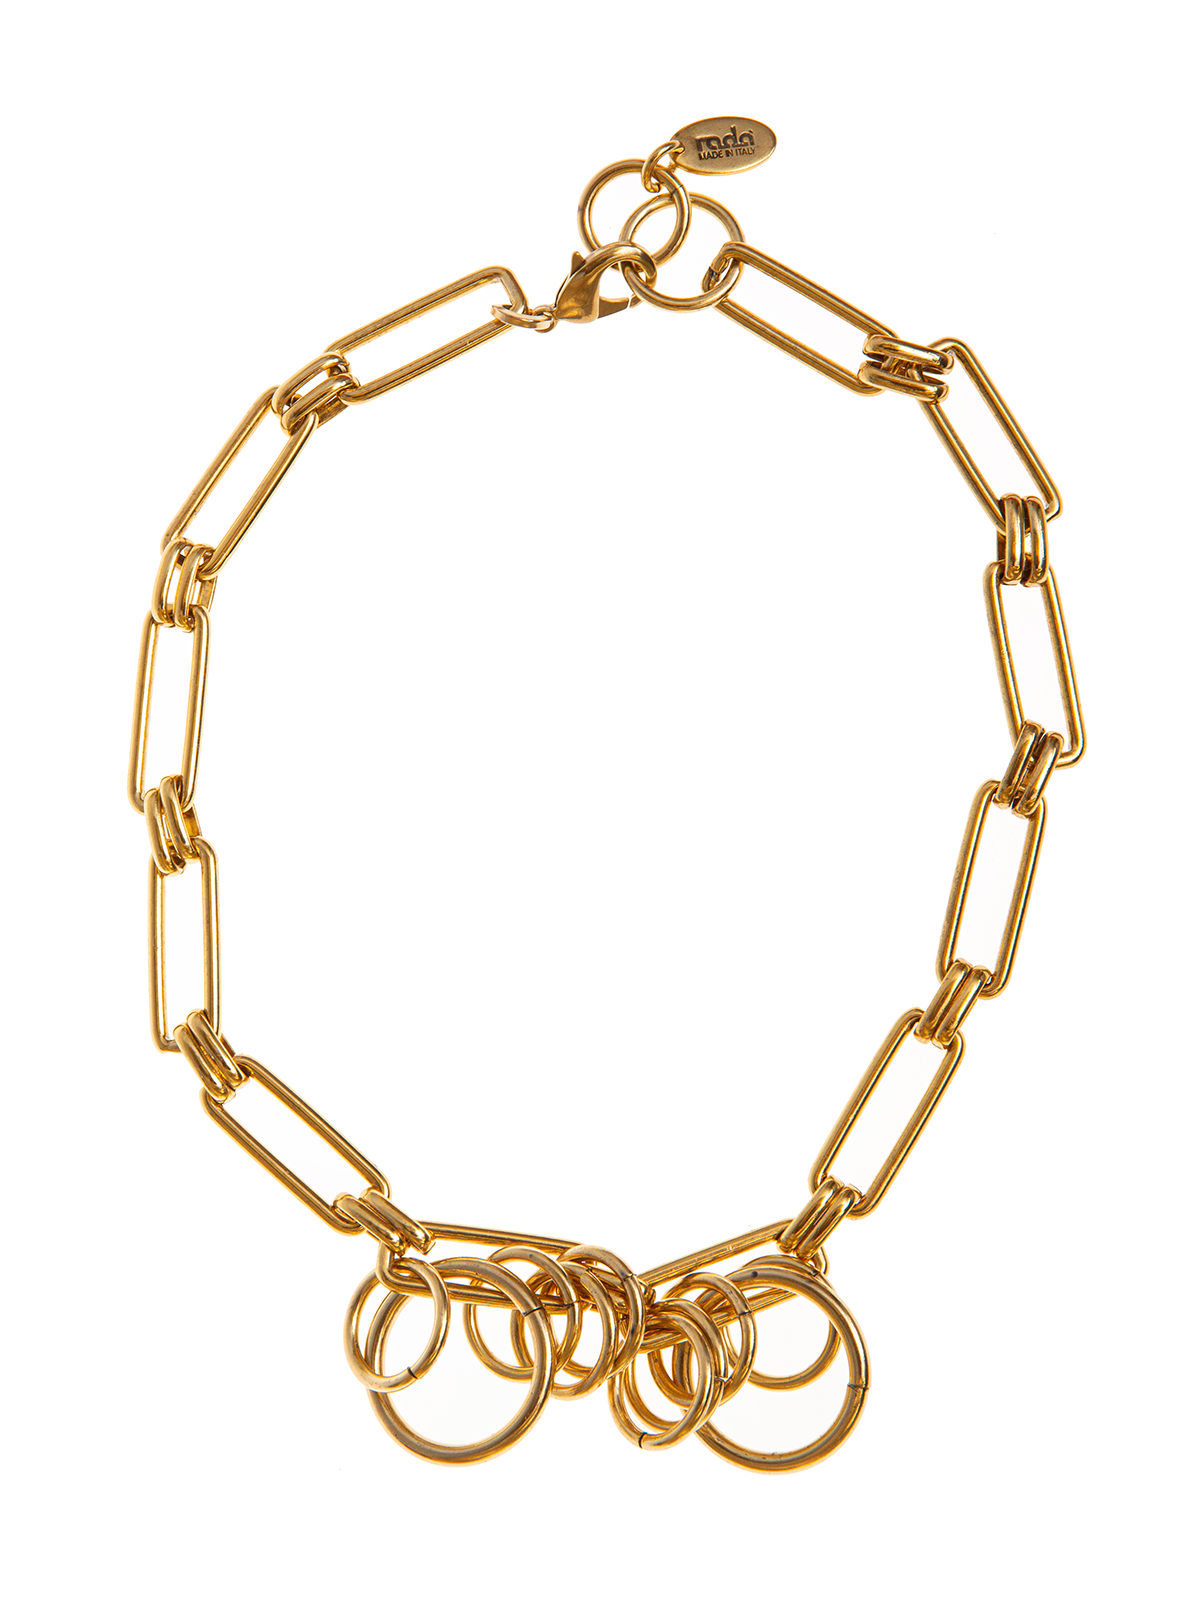 Rectangular chain necklace embellished with rings